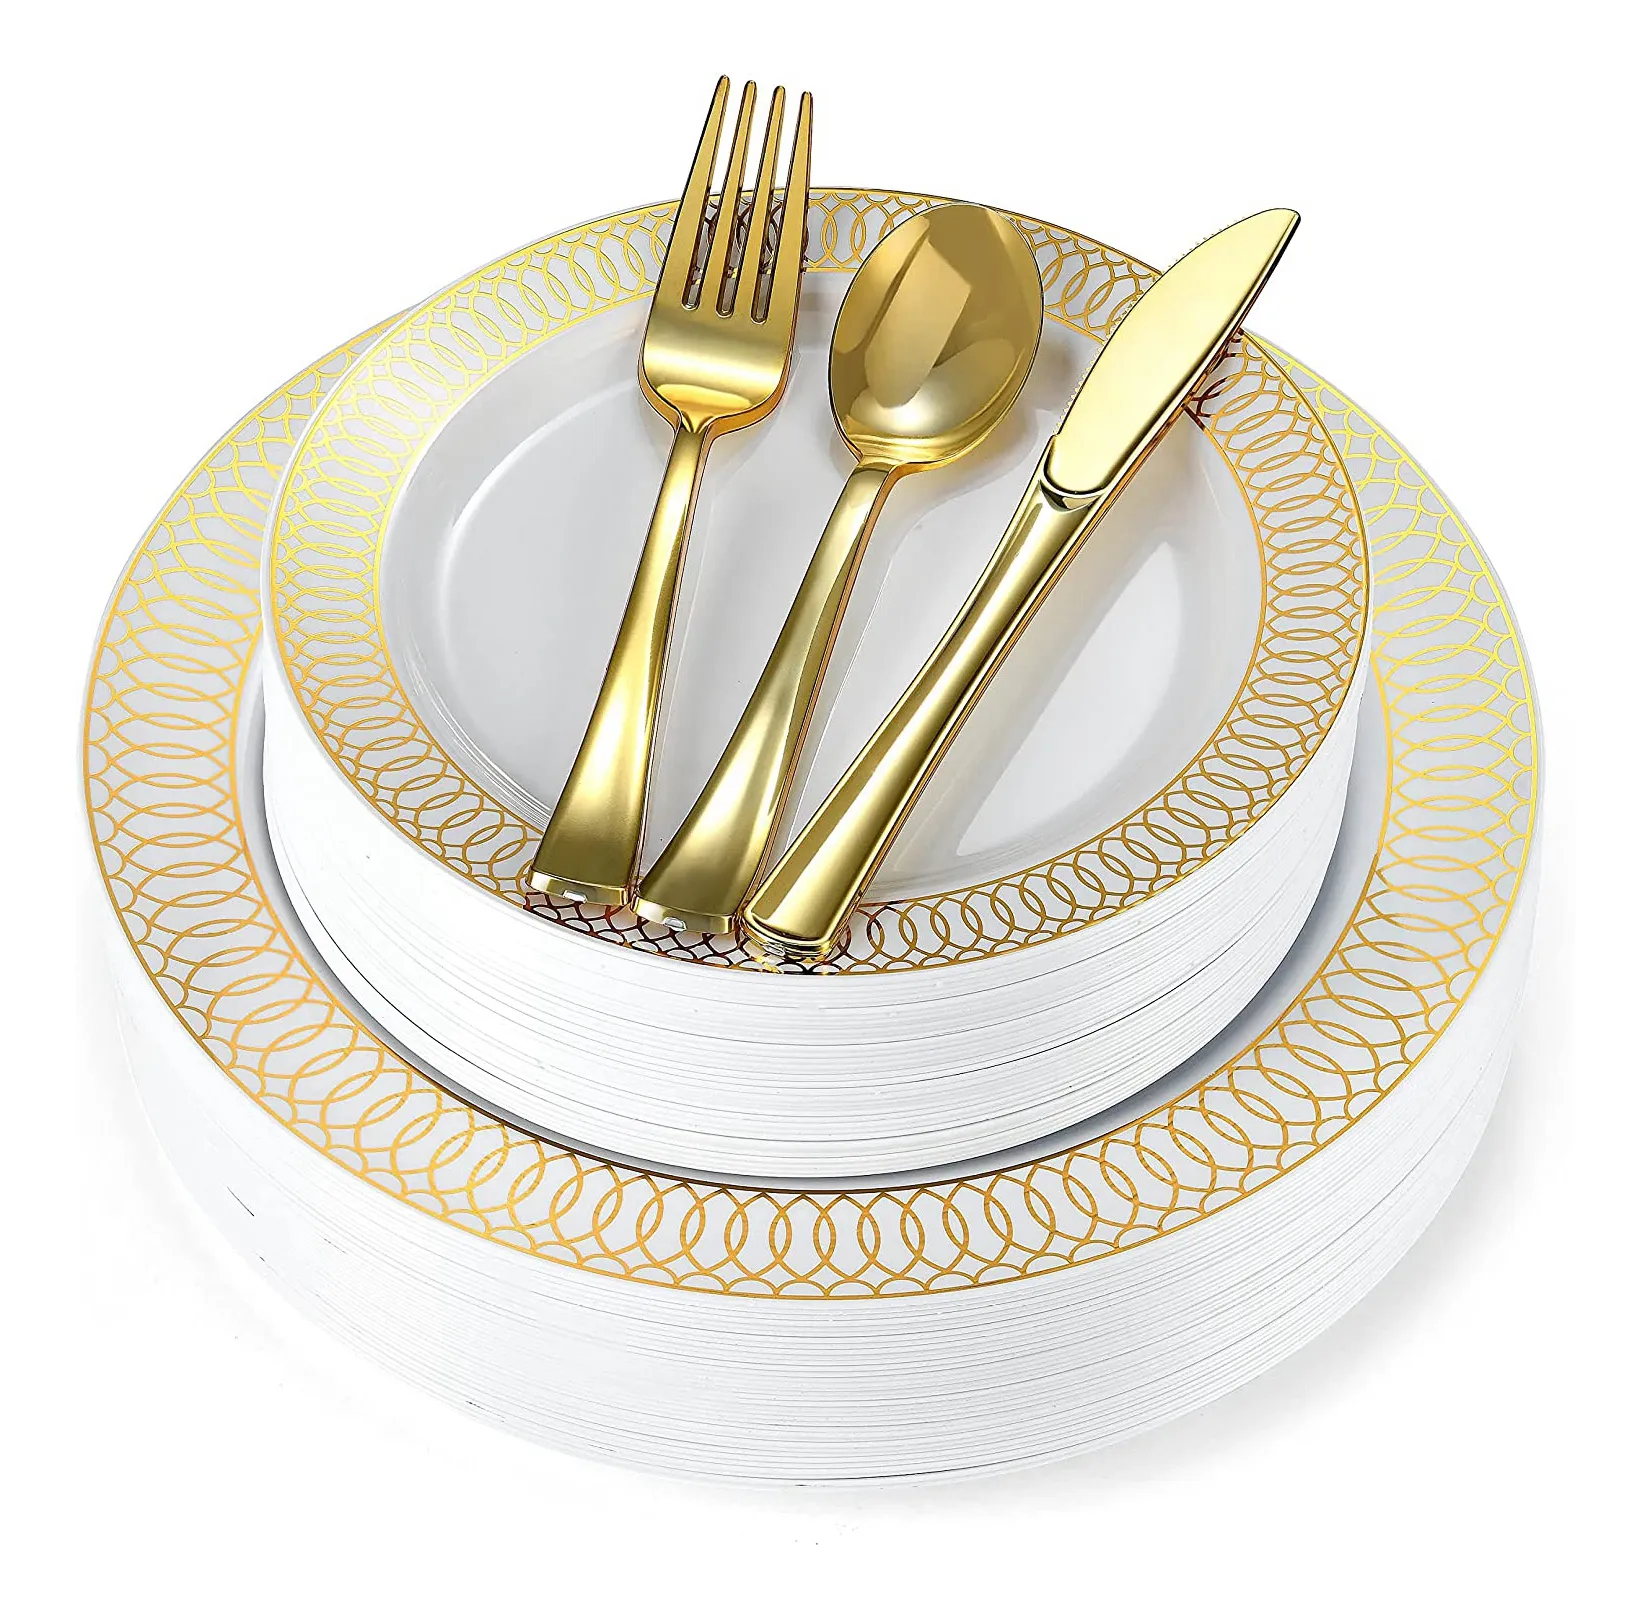 Disposable Plastic Fancy Flower Design Gold Stamped charger Plates Dinnerware sets for party